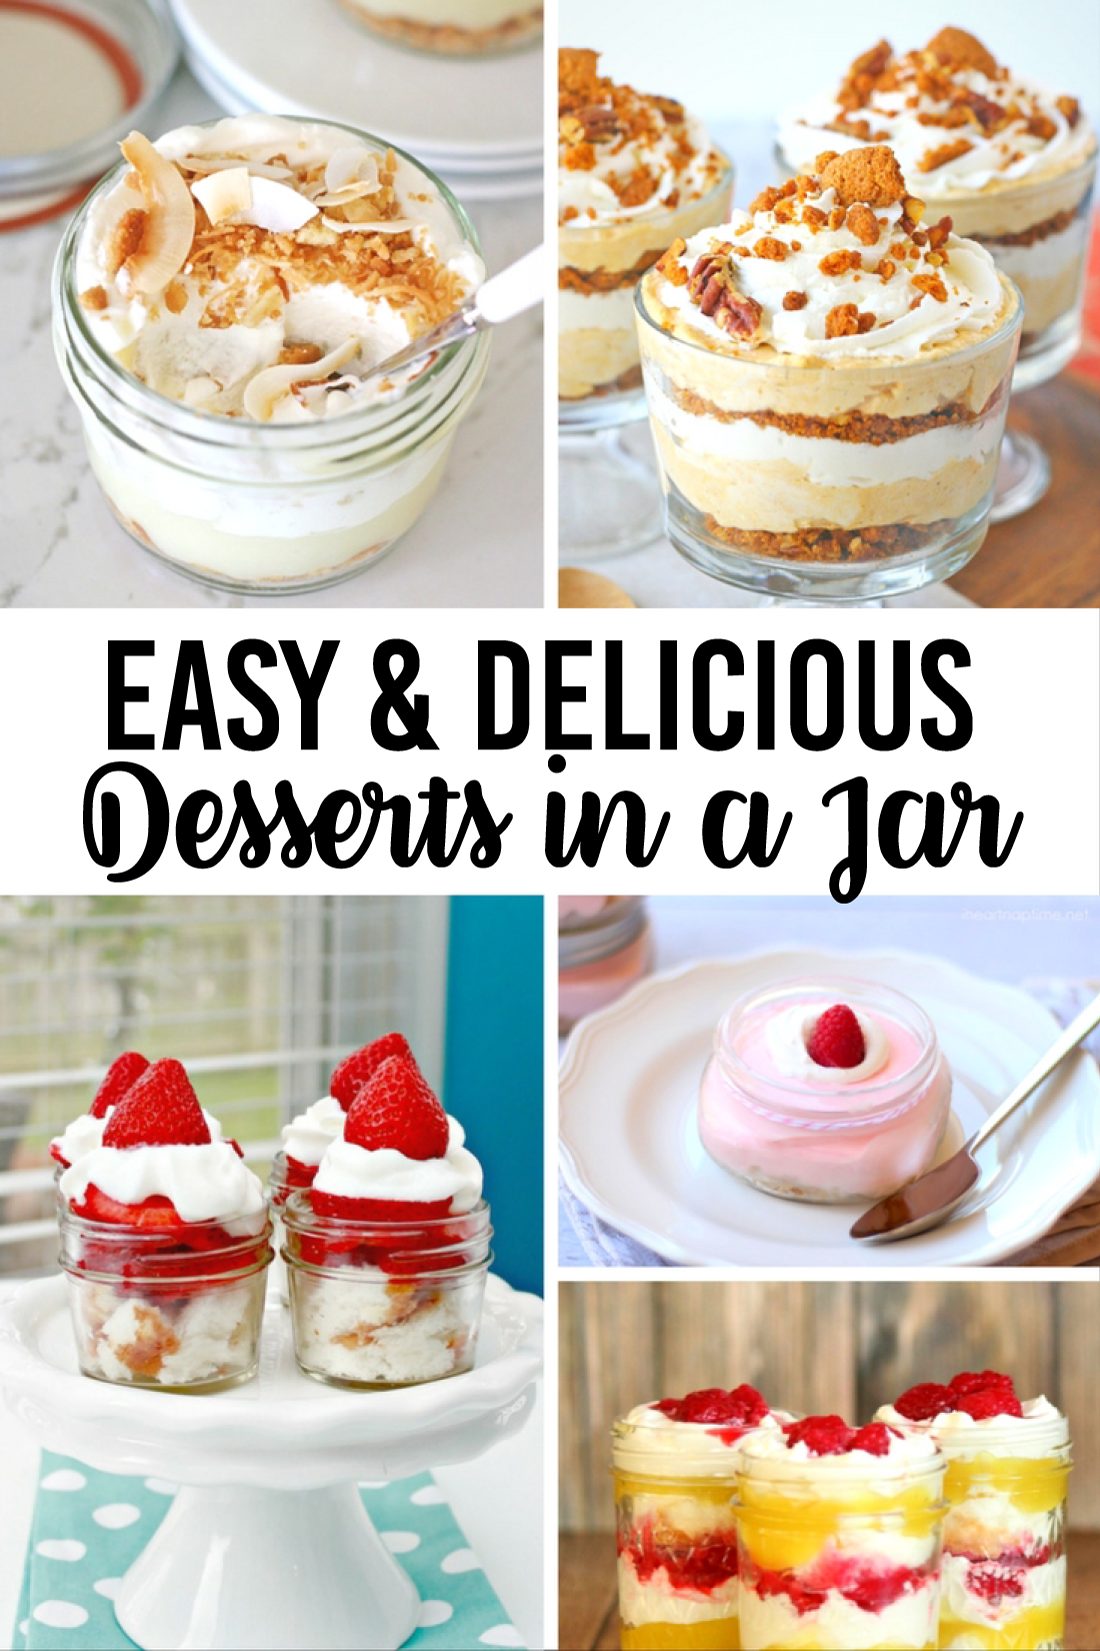 20 Easy and Delicious Desserts in a Jar